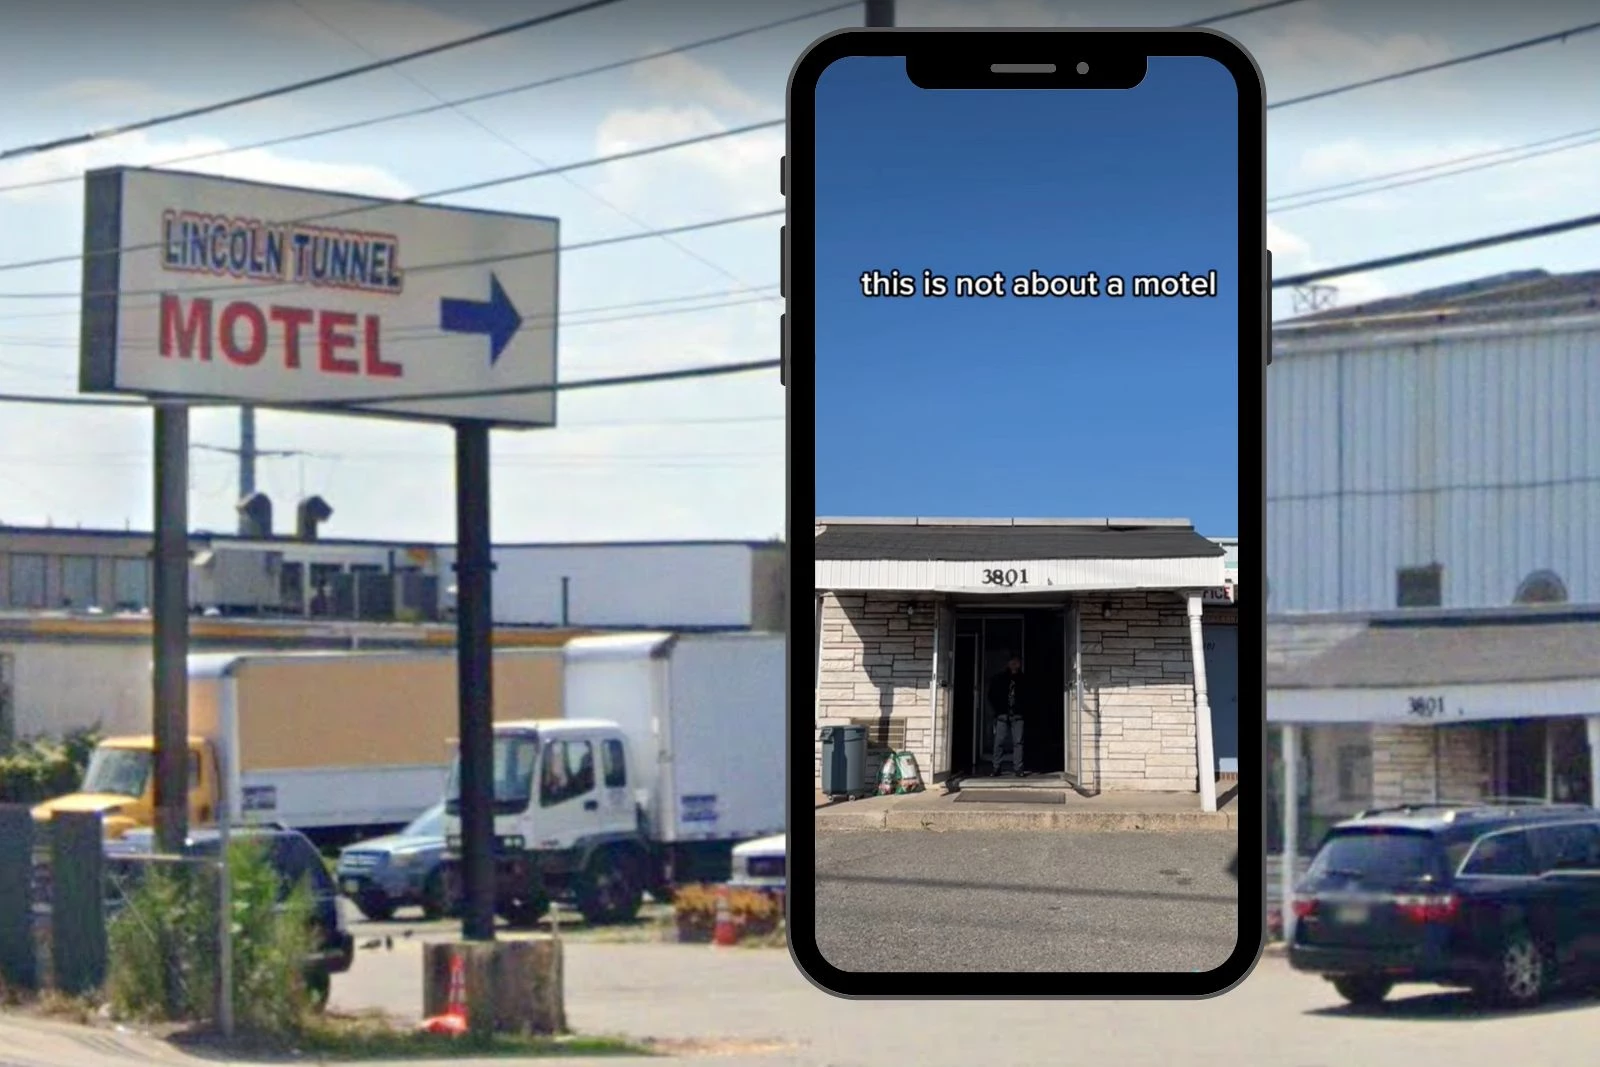 Police field 'thousands' of calls from TikTok famous NJ motel